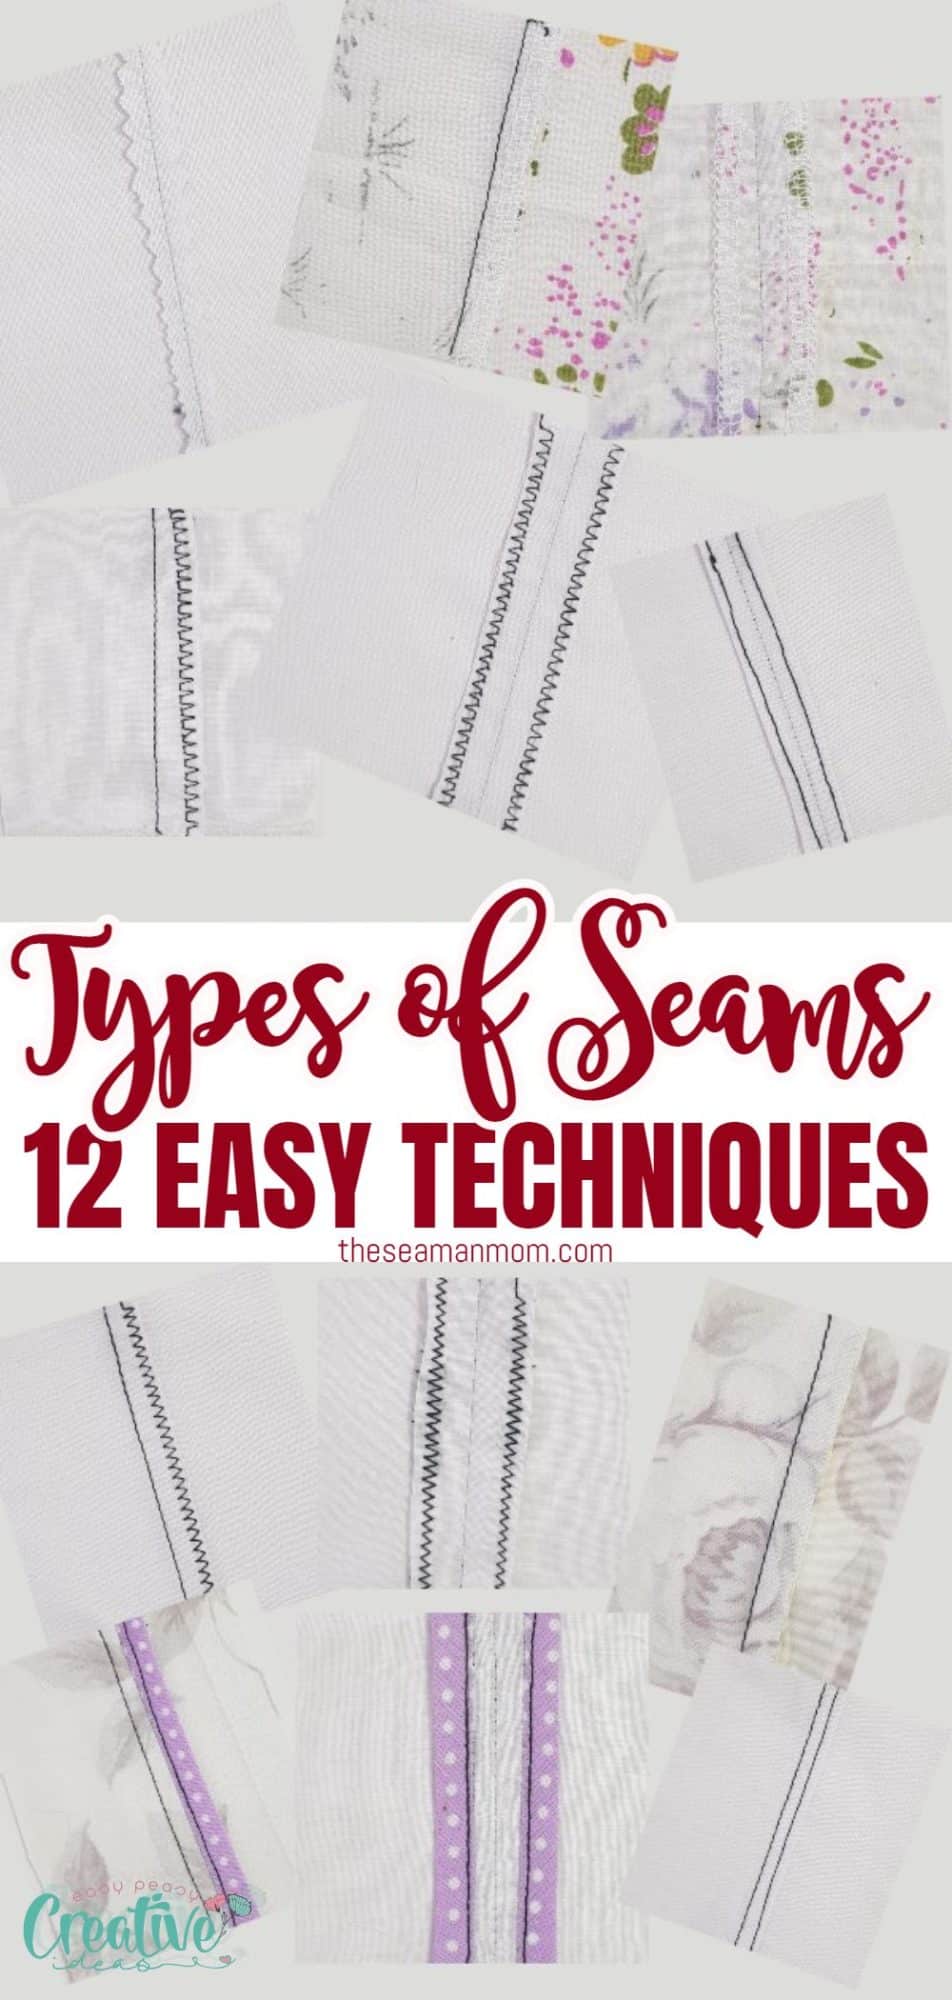 12 easy types of seams to sew